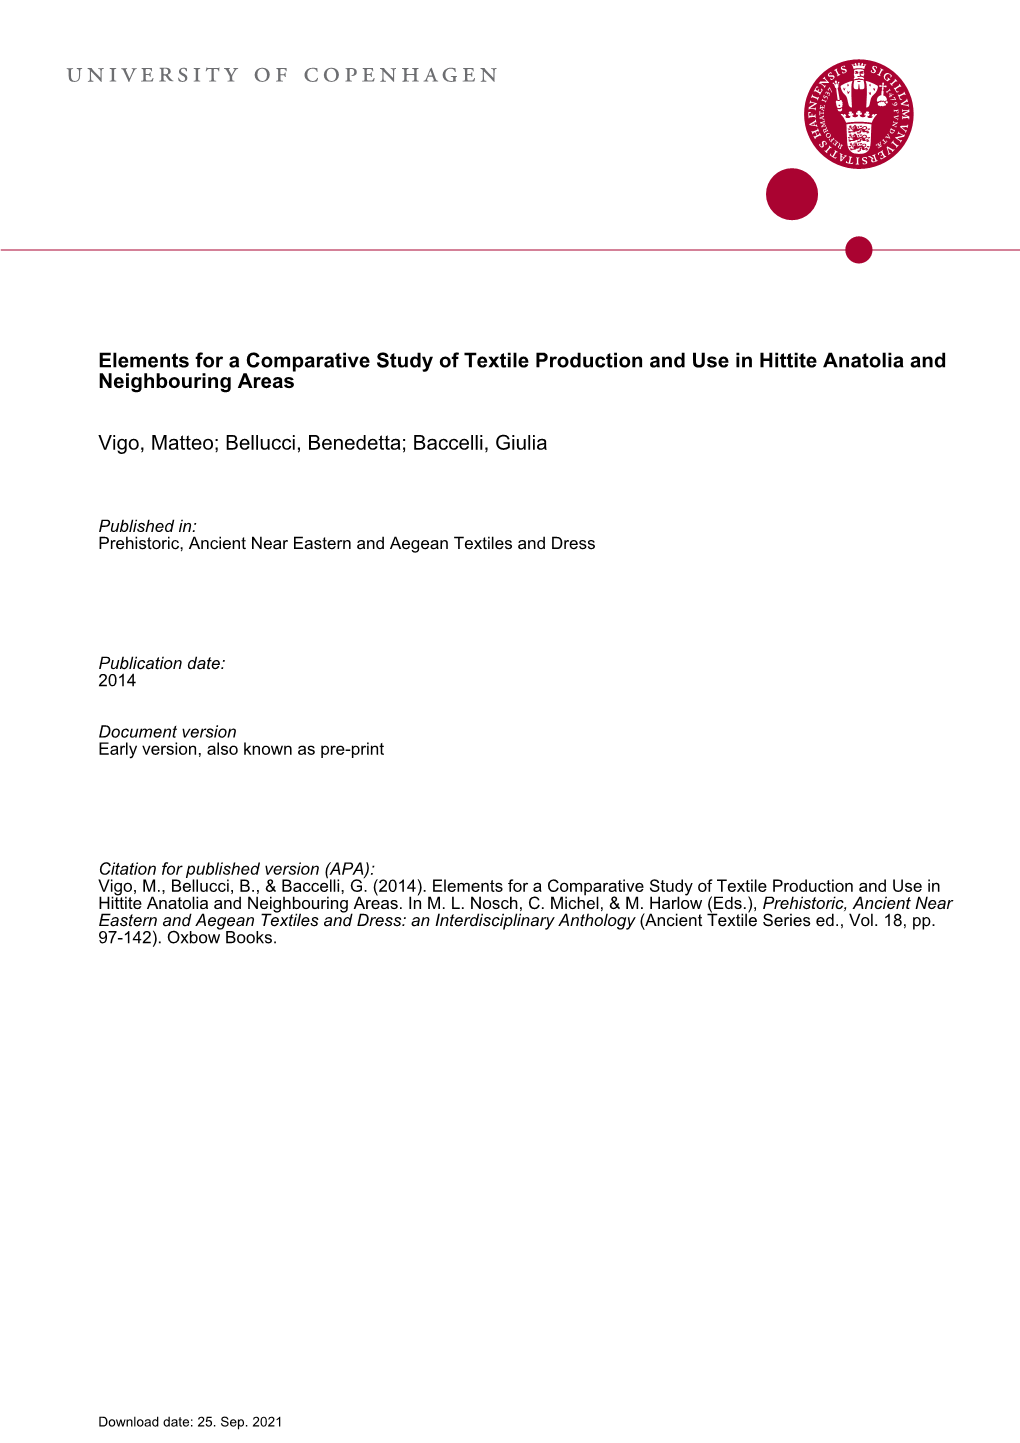 Elements for a Comparative Study of Textile Production and Use in Hittite Anatolia and Neighbouring Areas